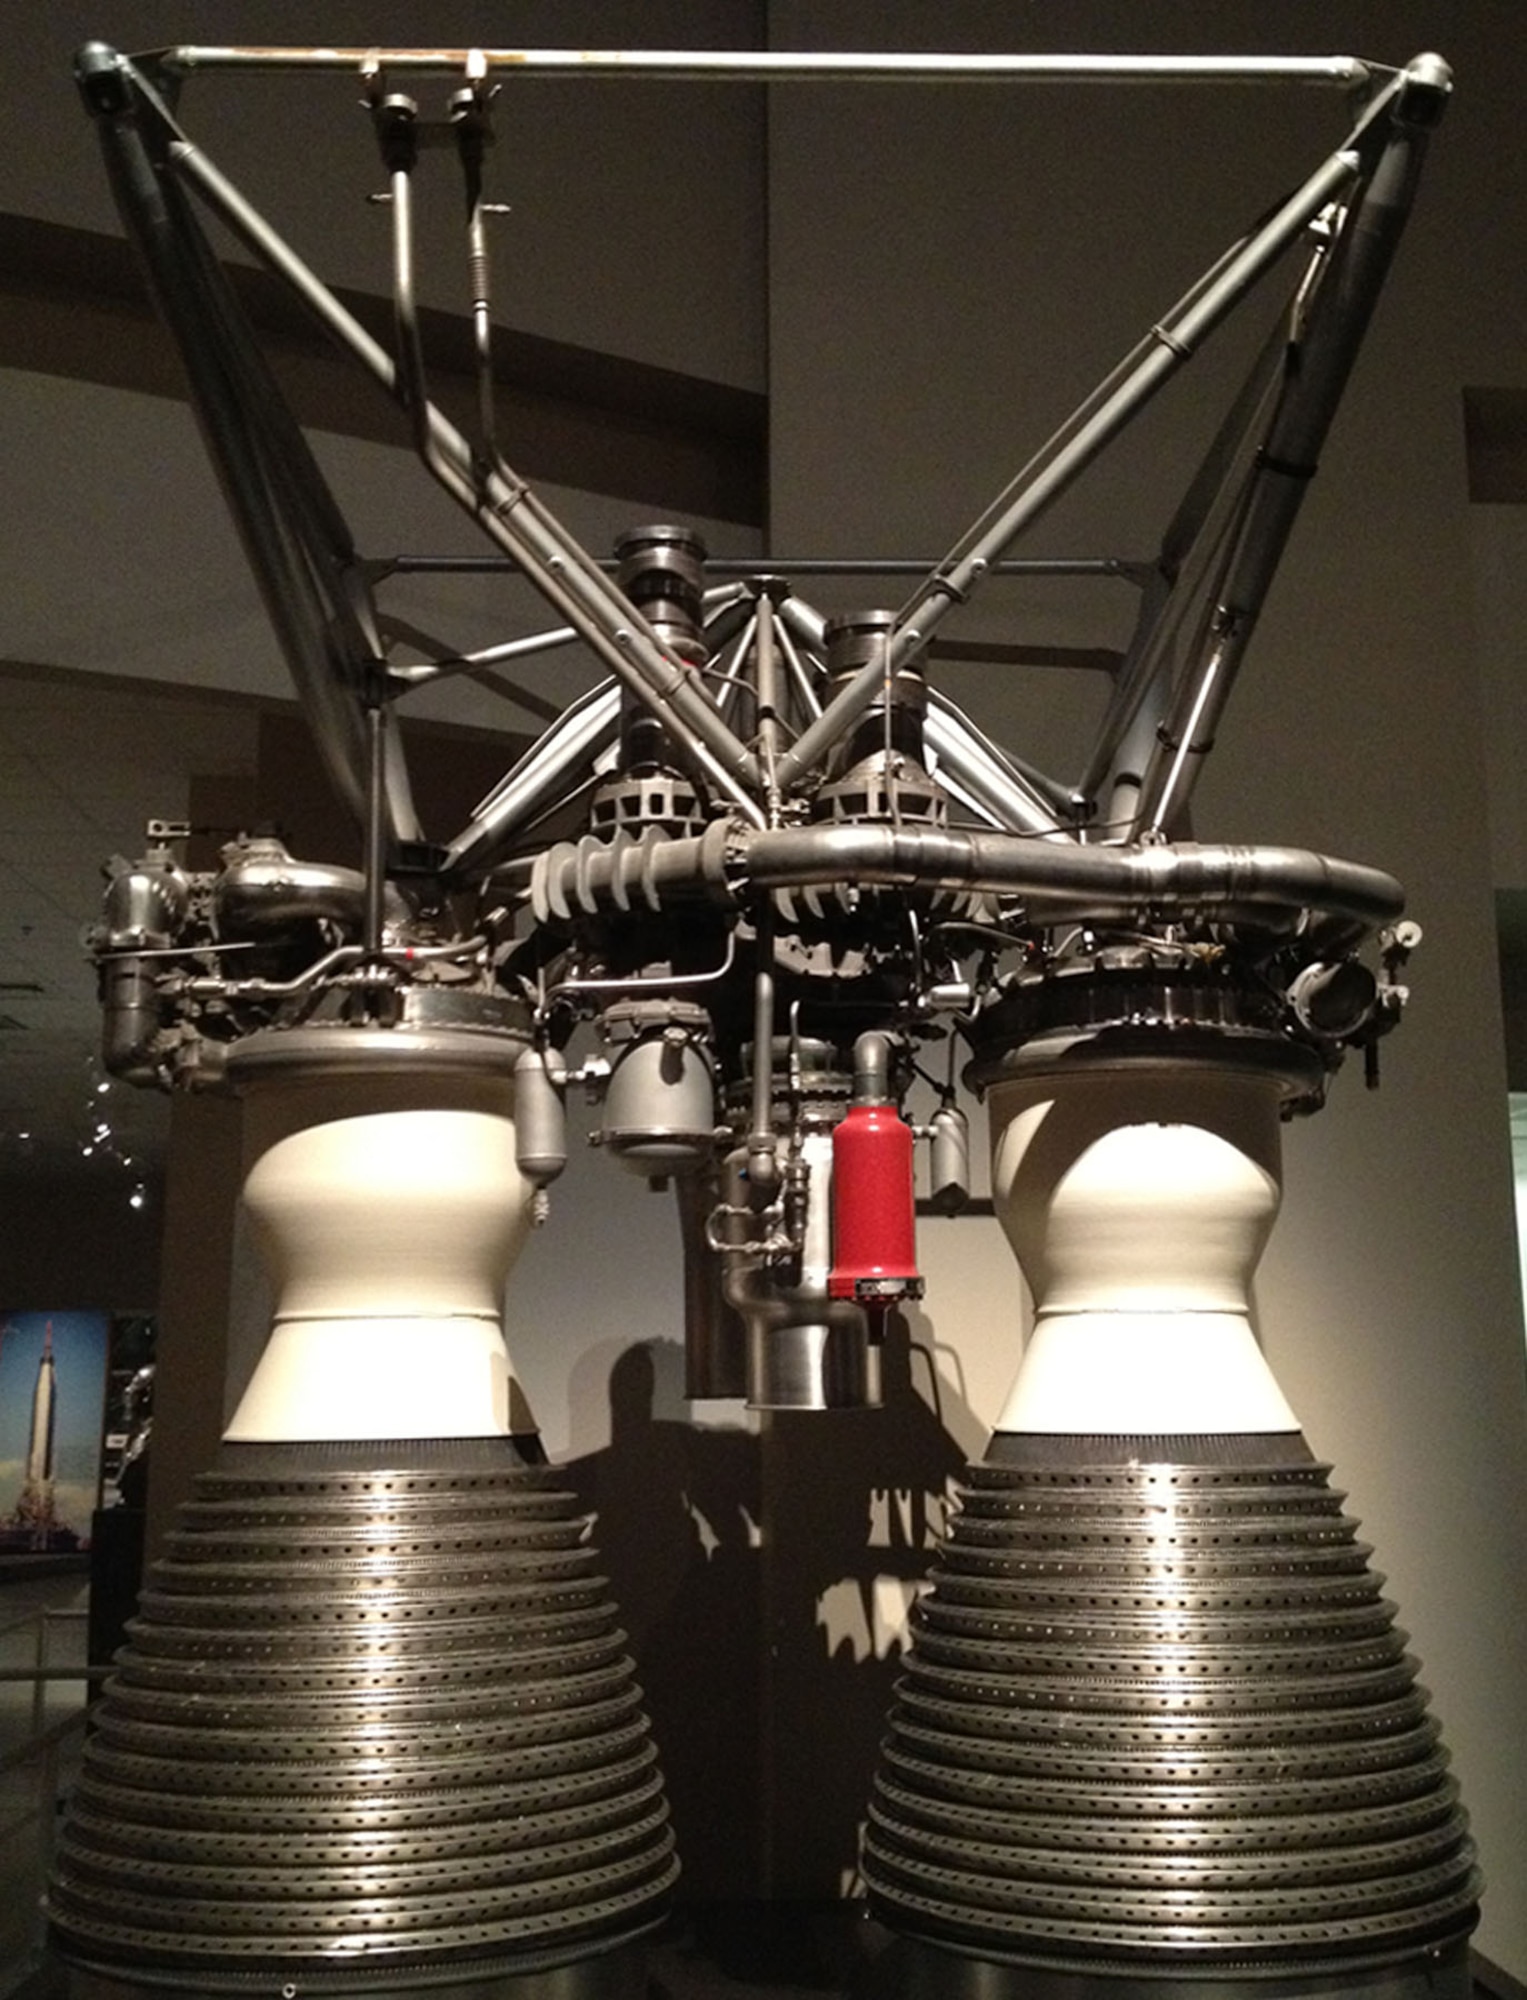 DAYTON, Ohio -- Aerojet-General LR87 engine at the National Museum of the United States Air Force. (U.S. Air Force photo)